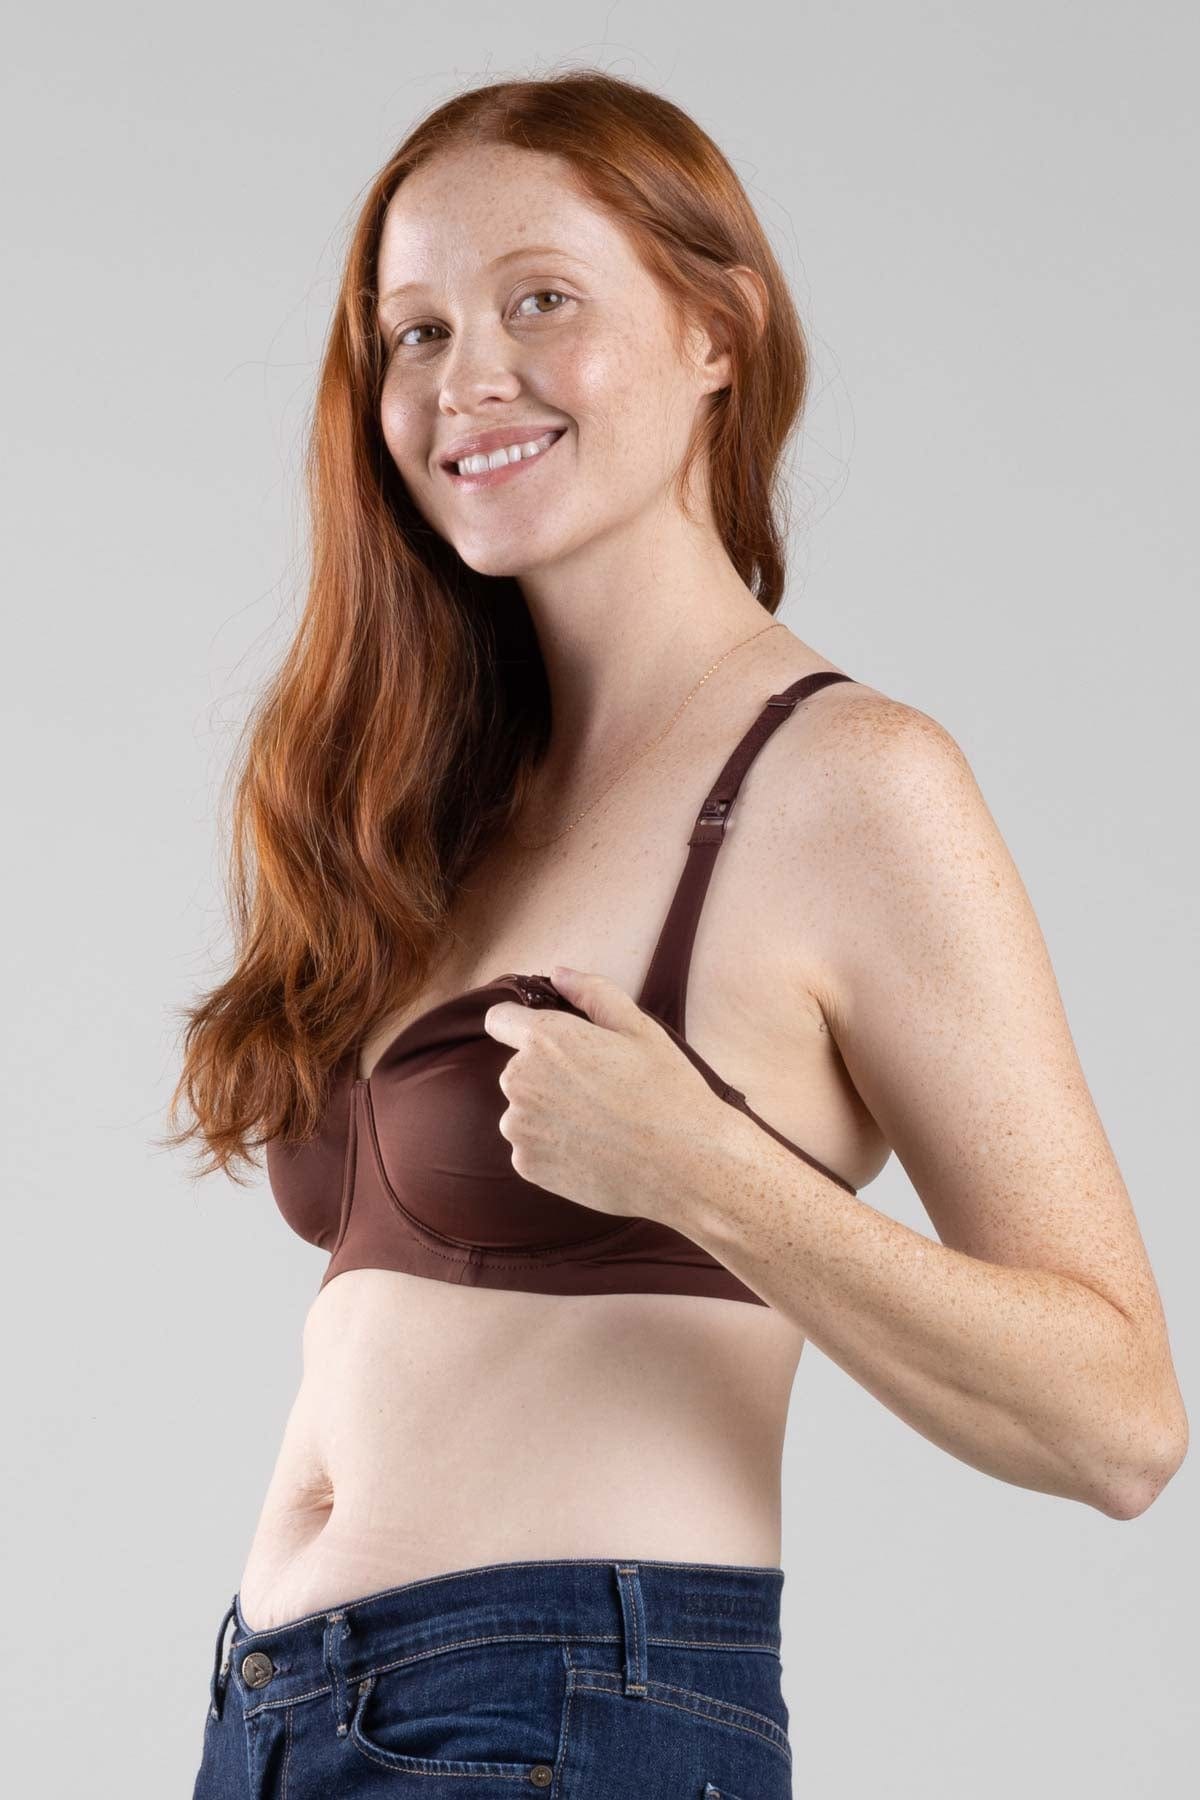 Simple Wishes SuperMom All-in-One Nursing and Pumping Bra